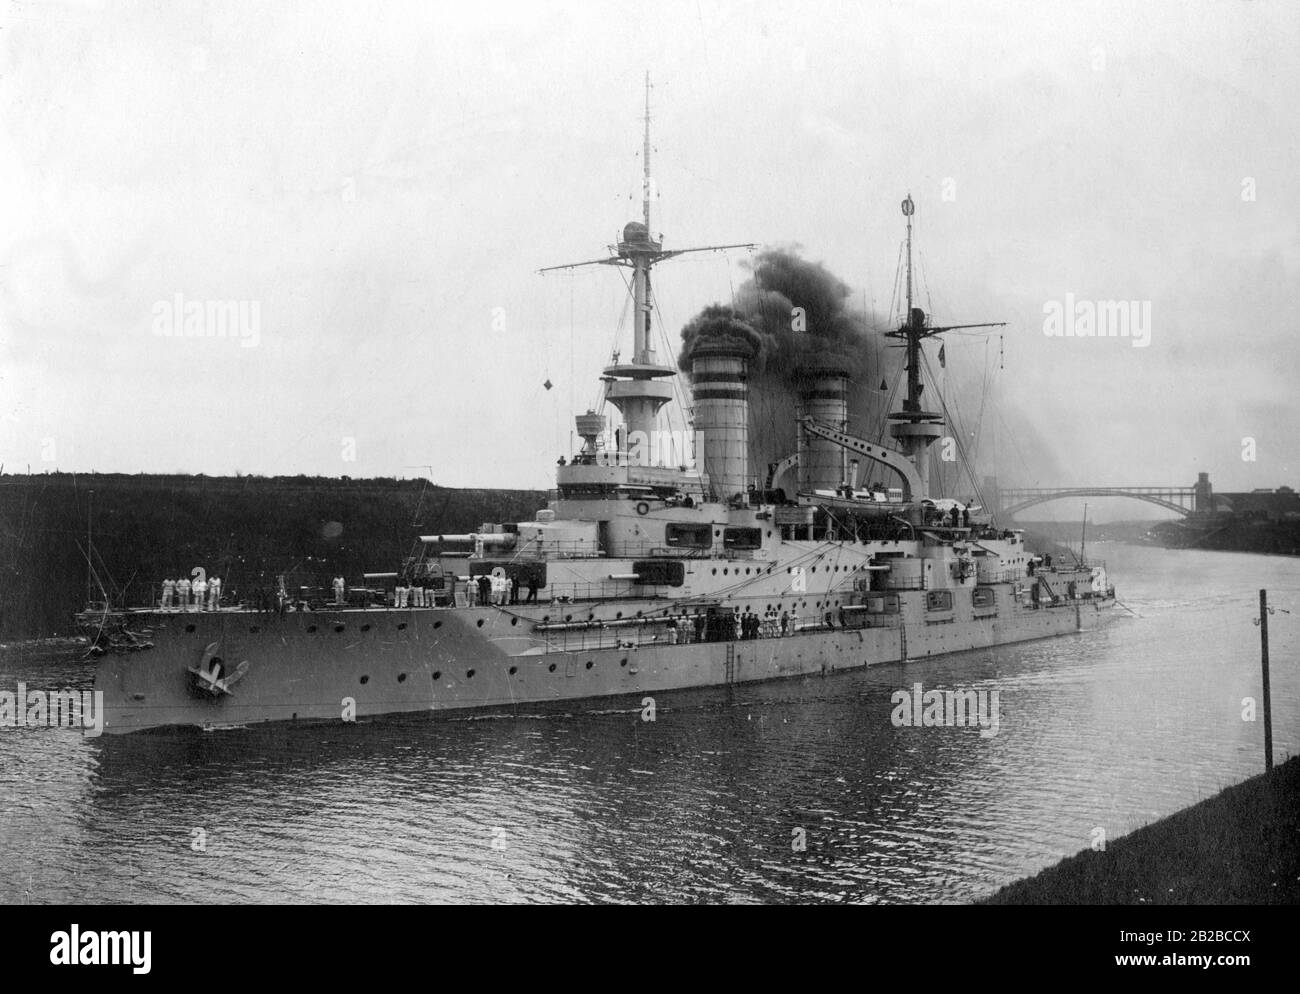 The SMS Zaehringen was a liner of the Imperial Navy, the third of a total of five ships of the Wittelsbach class. She was commissioned in 1902 and was in service during the First and Second World Wars until she was sunk off the Bay of Gdansk in 1944. Stock Photo